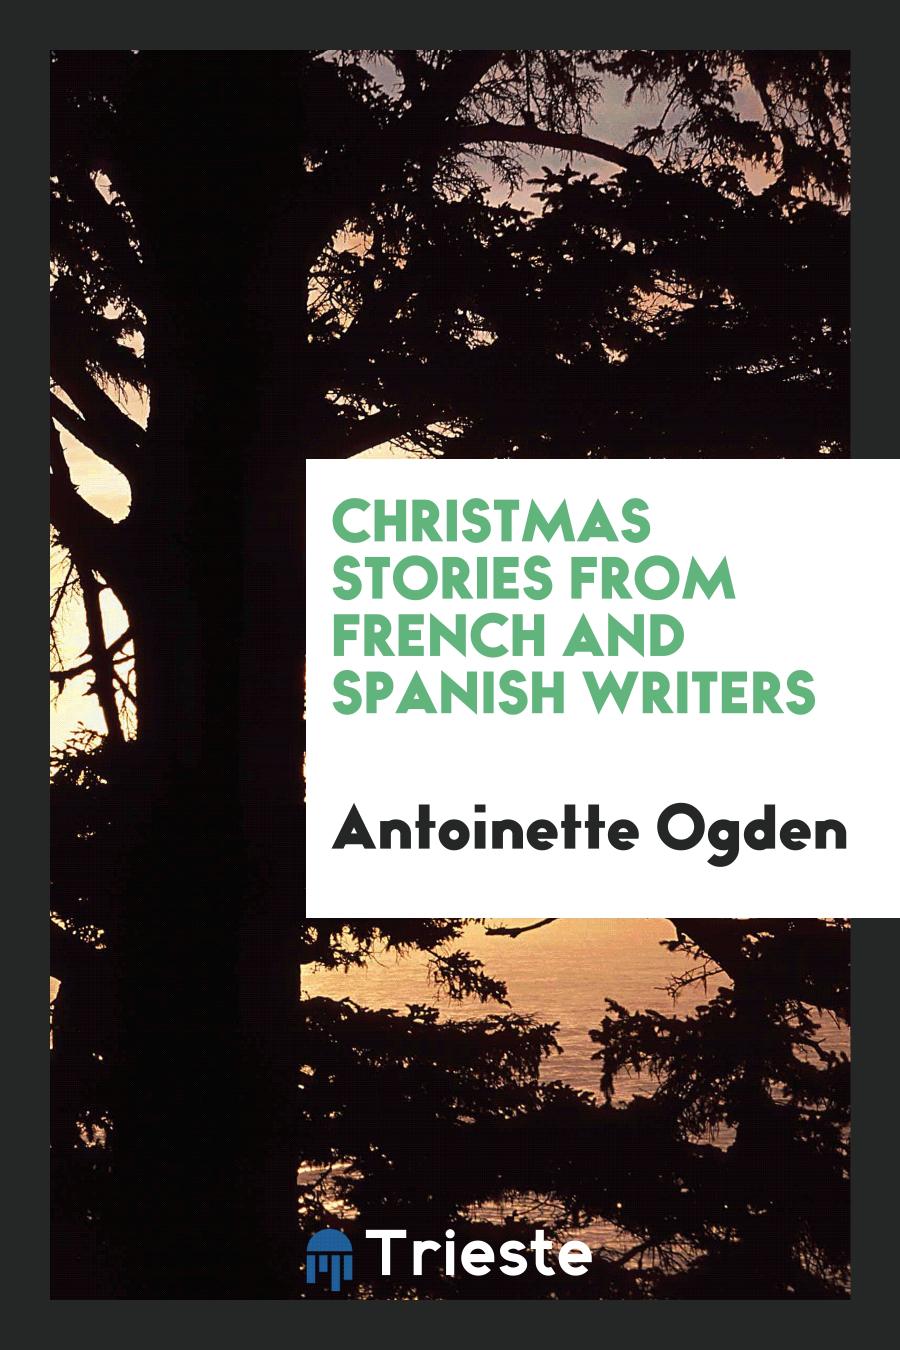 Christmas stories from French and Spanish writers